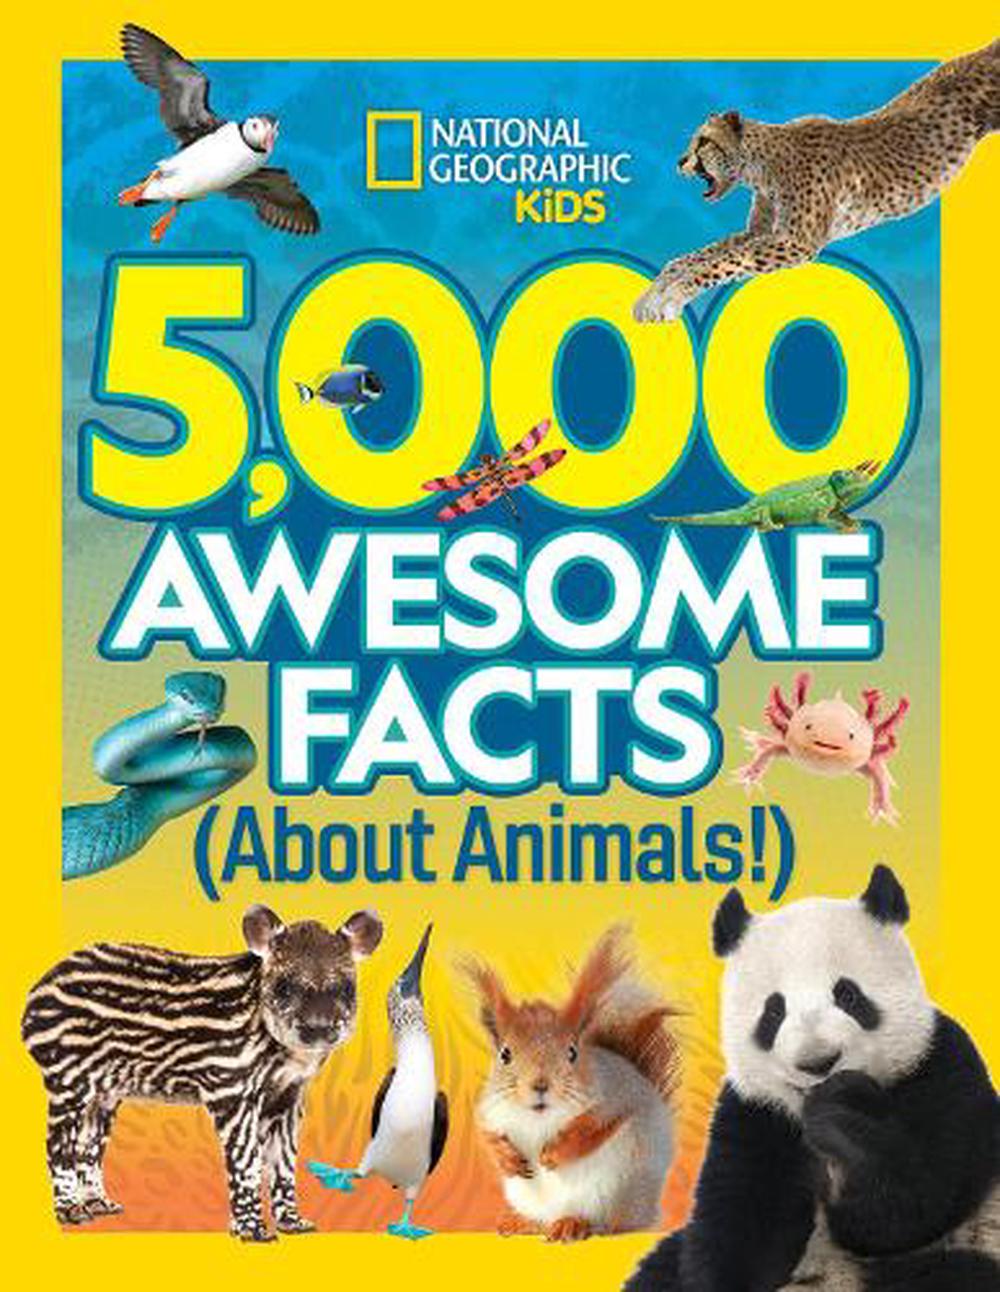 5,000 Awesome Facts About Animals by National Geographic Kids, Hardcover,  9781426372612 | Buy online at The Nile